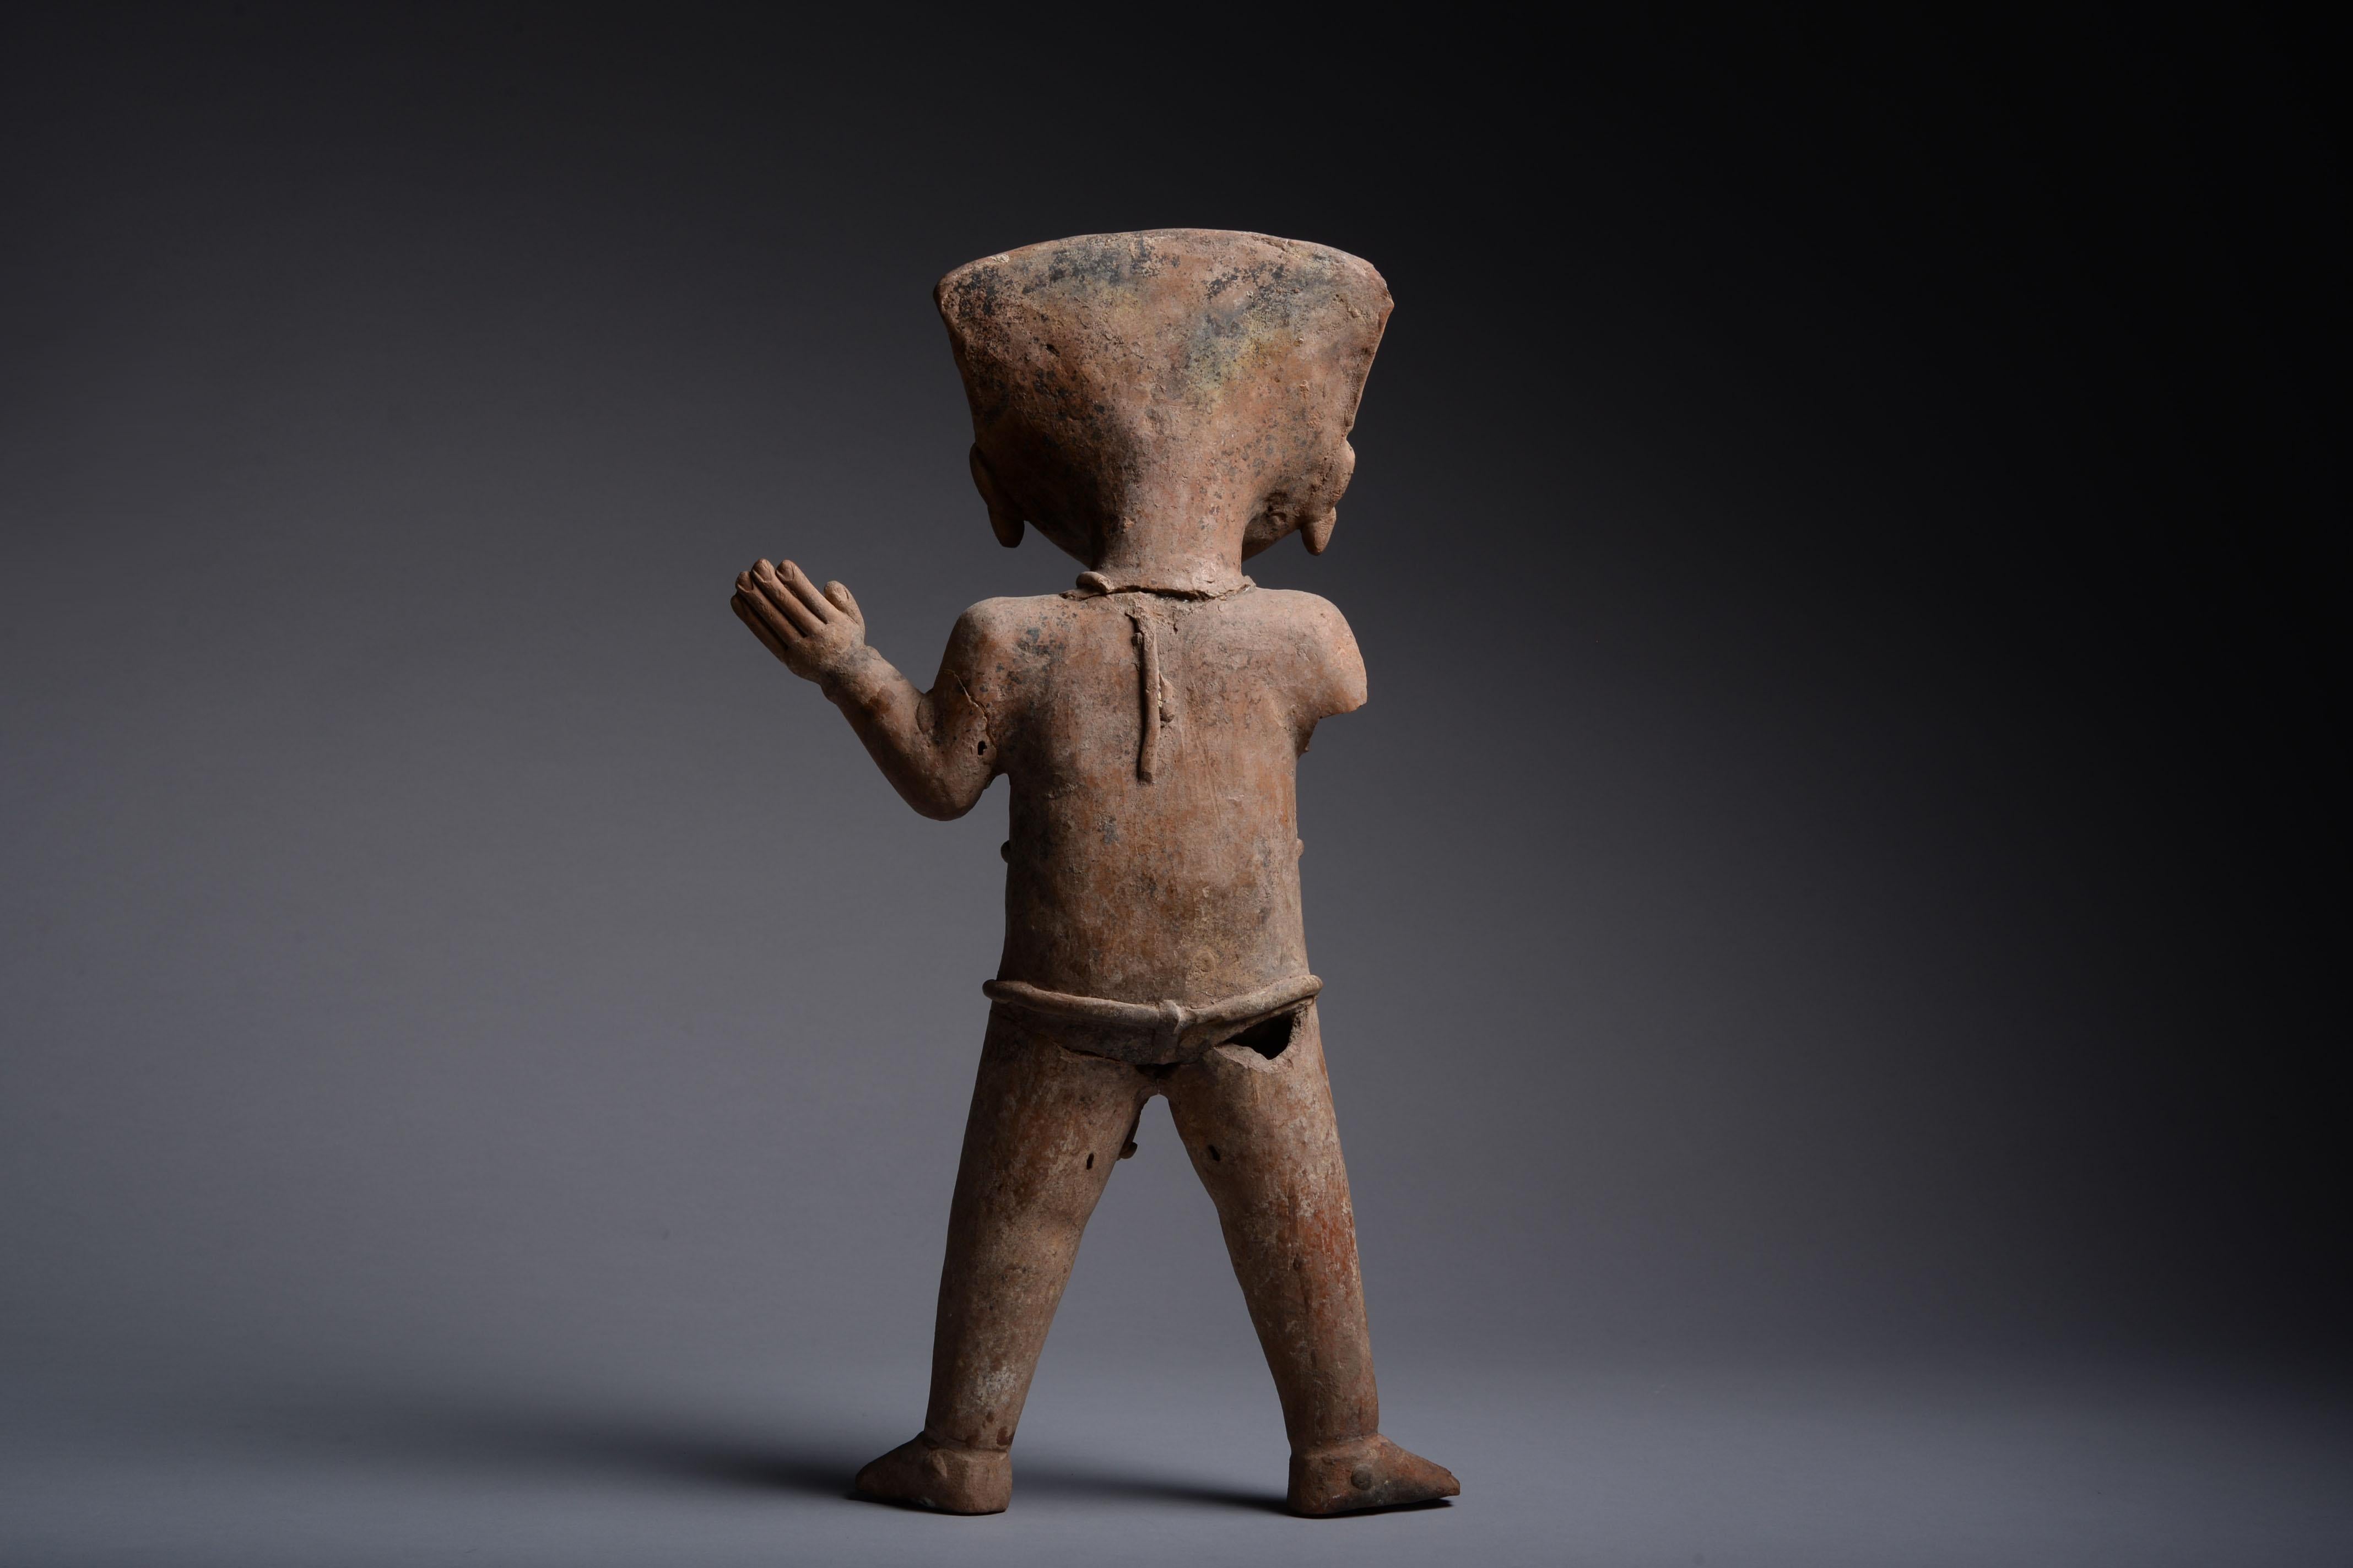 18th Century and Earlier Seeger Collection Ancient Pre-Columbian Pottery Laughing Veracruz Figure, 550 AD